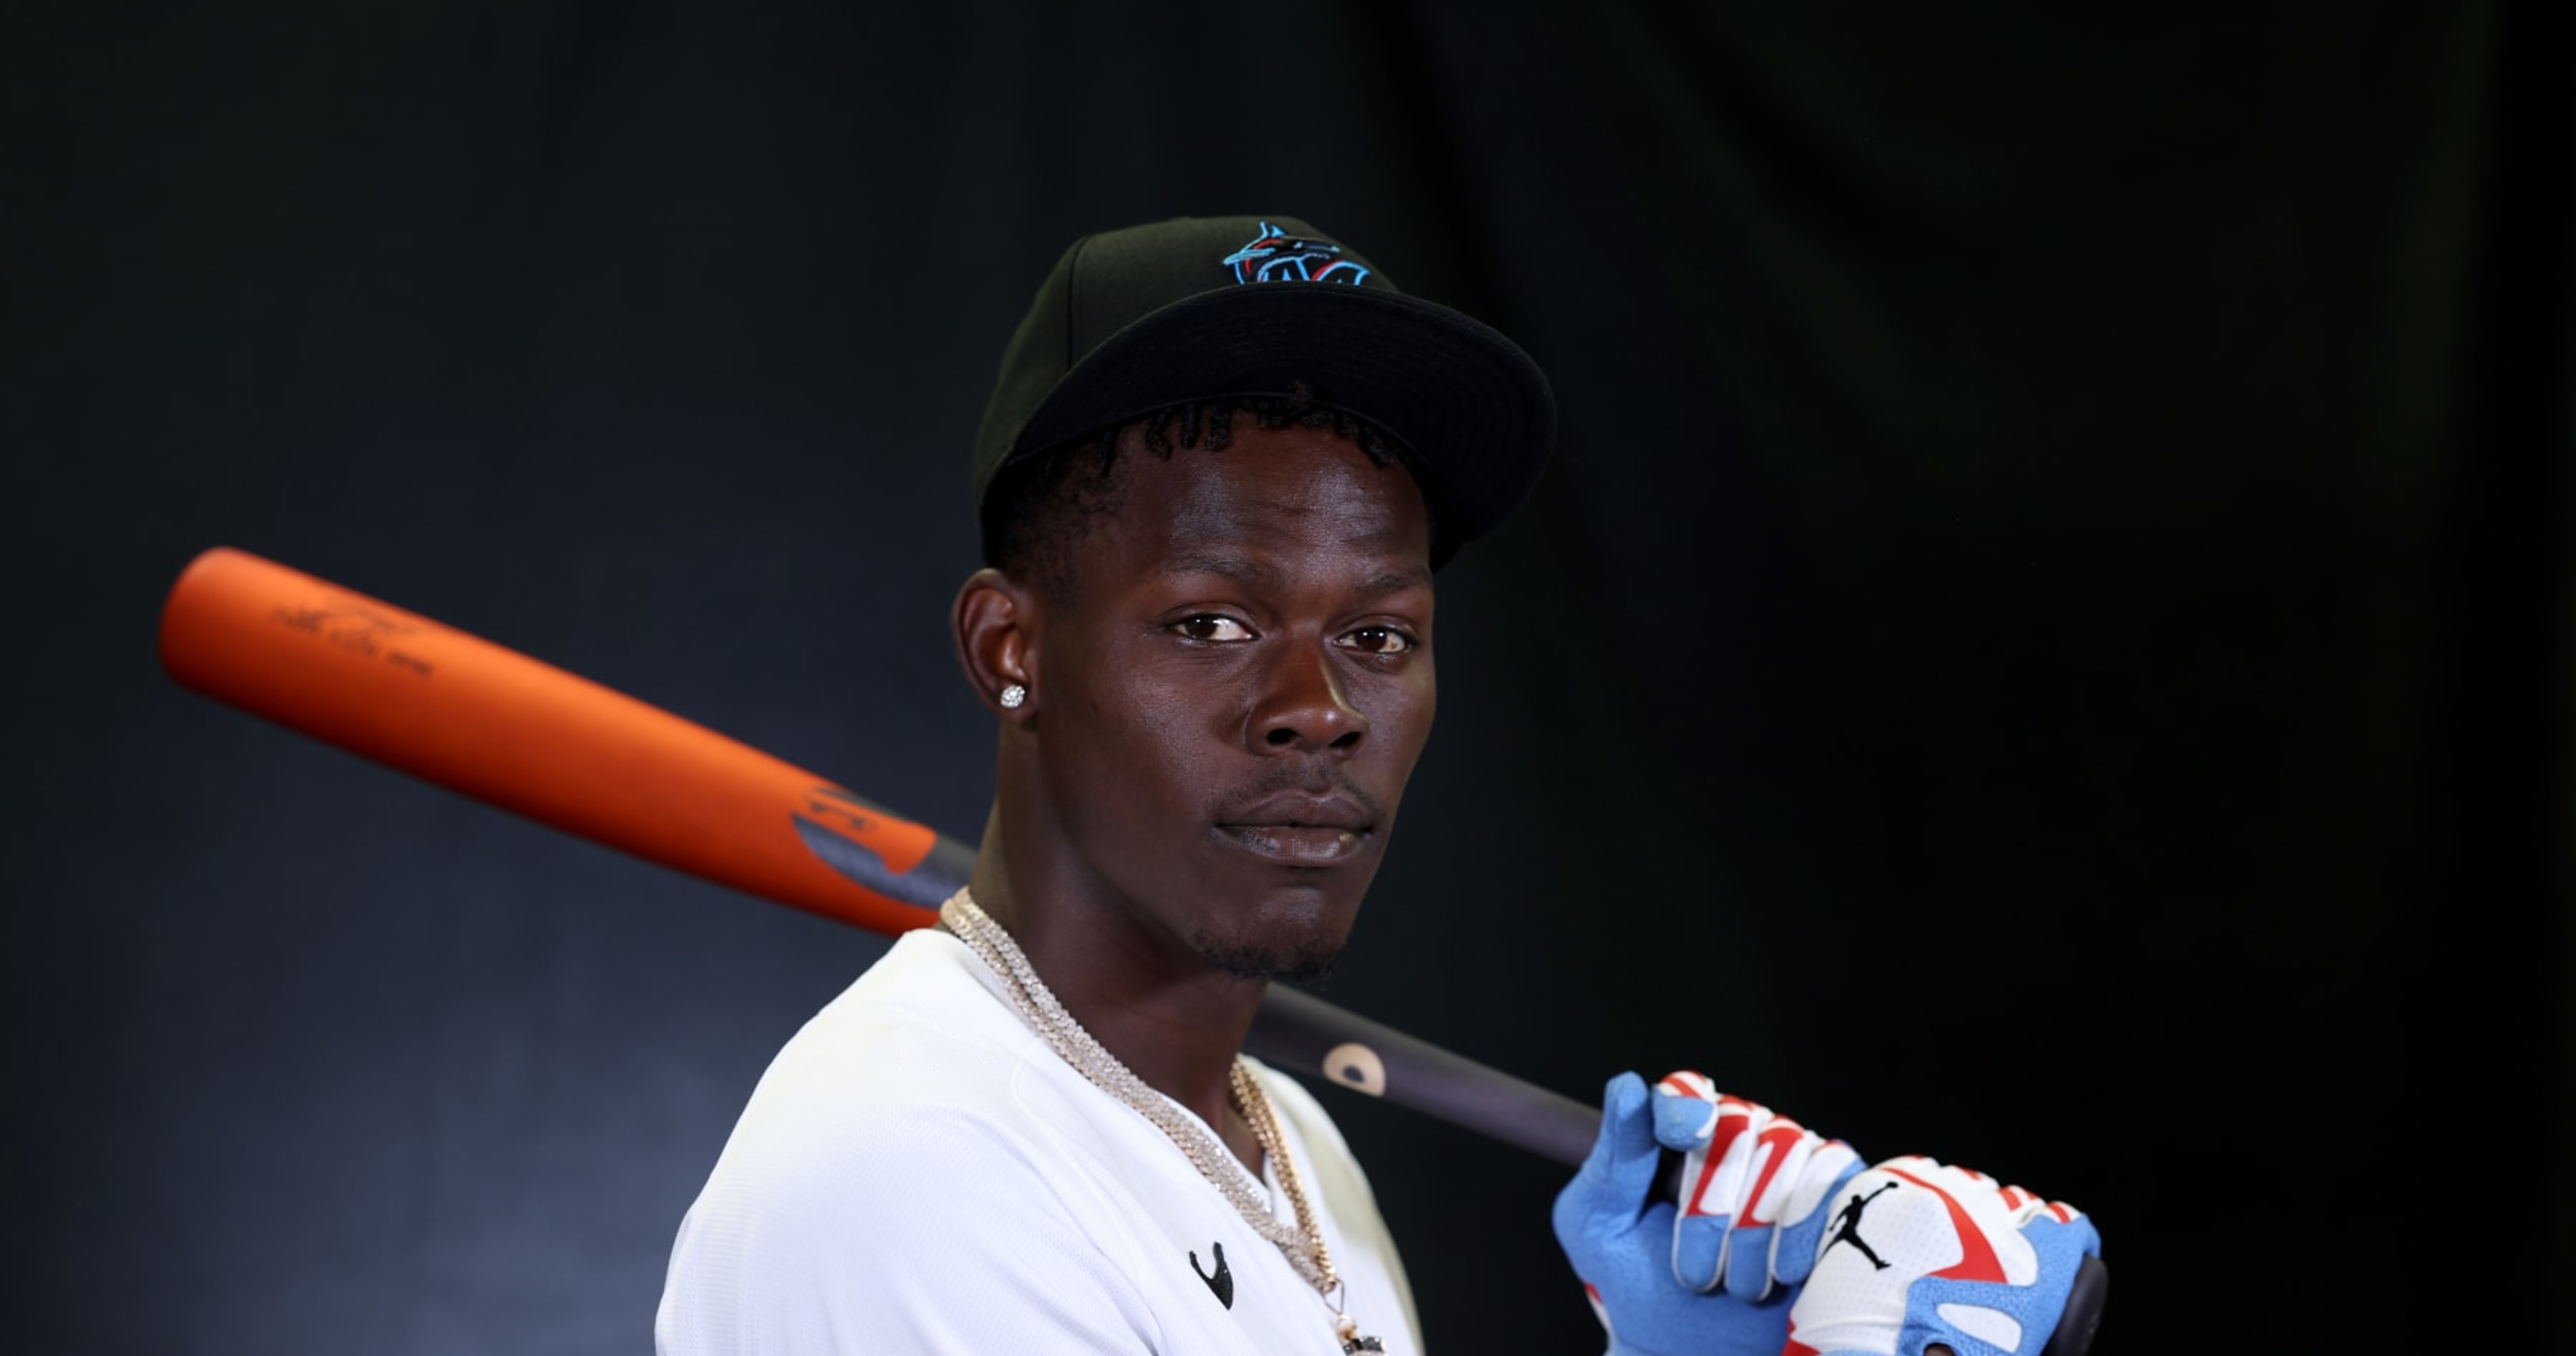 Jazz Chisholm Jr. #2 of the Miami Marlins bats in the game against